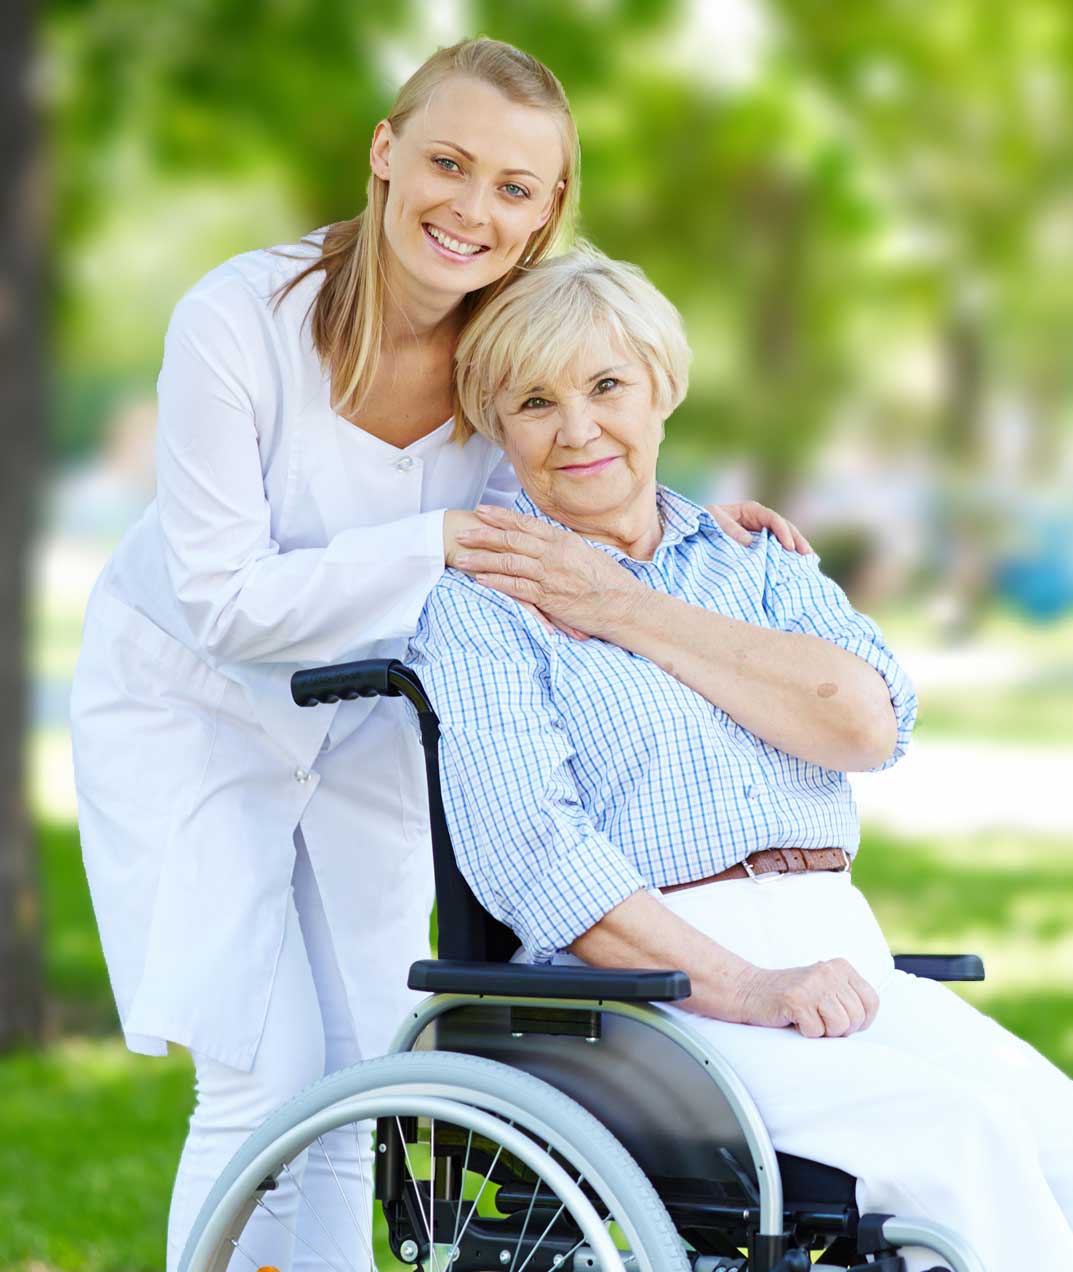 A caring healthcare assistant supporting a smiling grandma in a     wheelchair, providing compassionate domiciliary care services